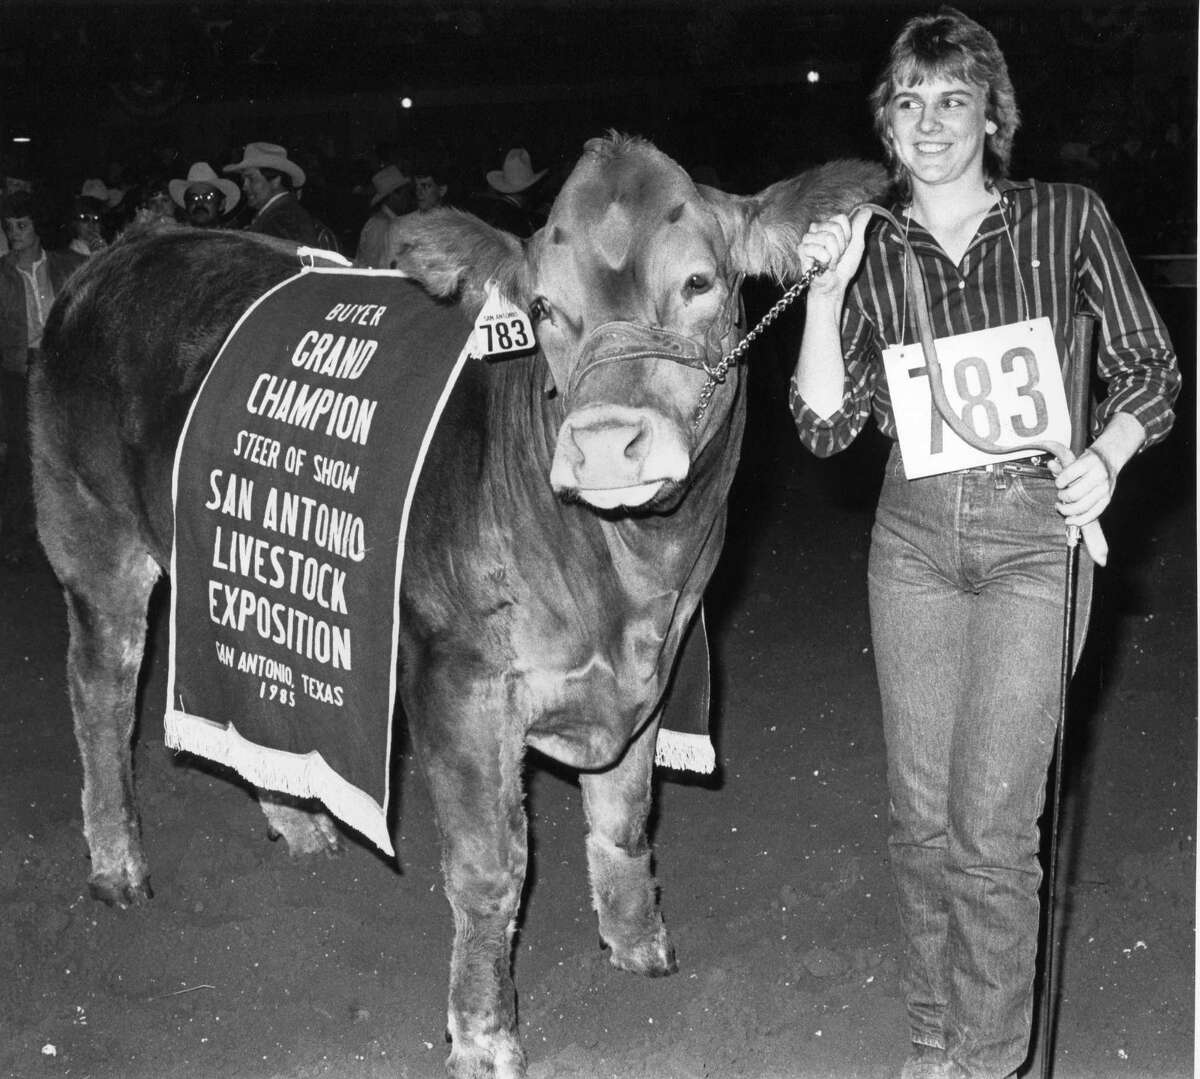 Suzanne Stewman from Sweetwater, Texas with her 1985 grand champion steer